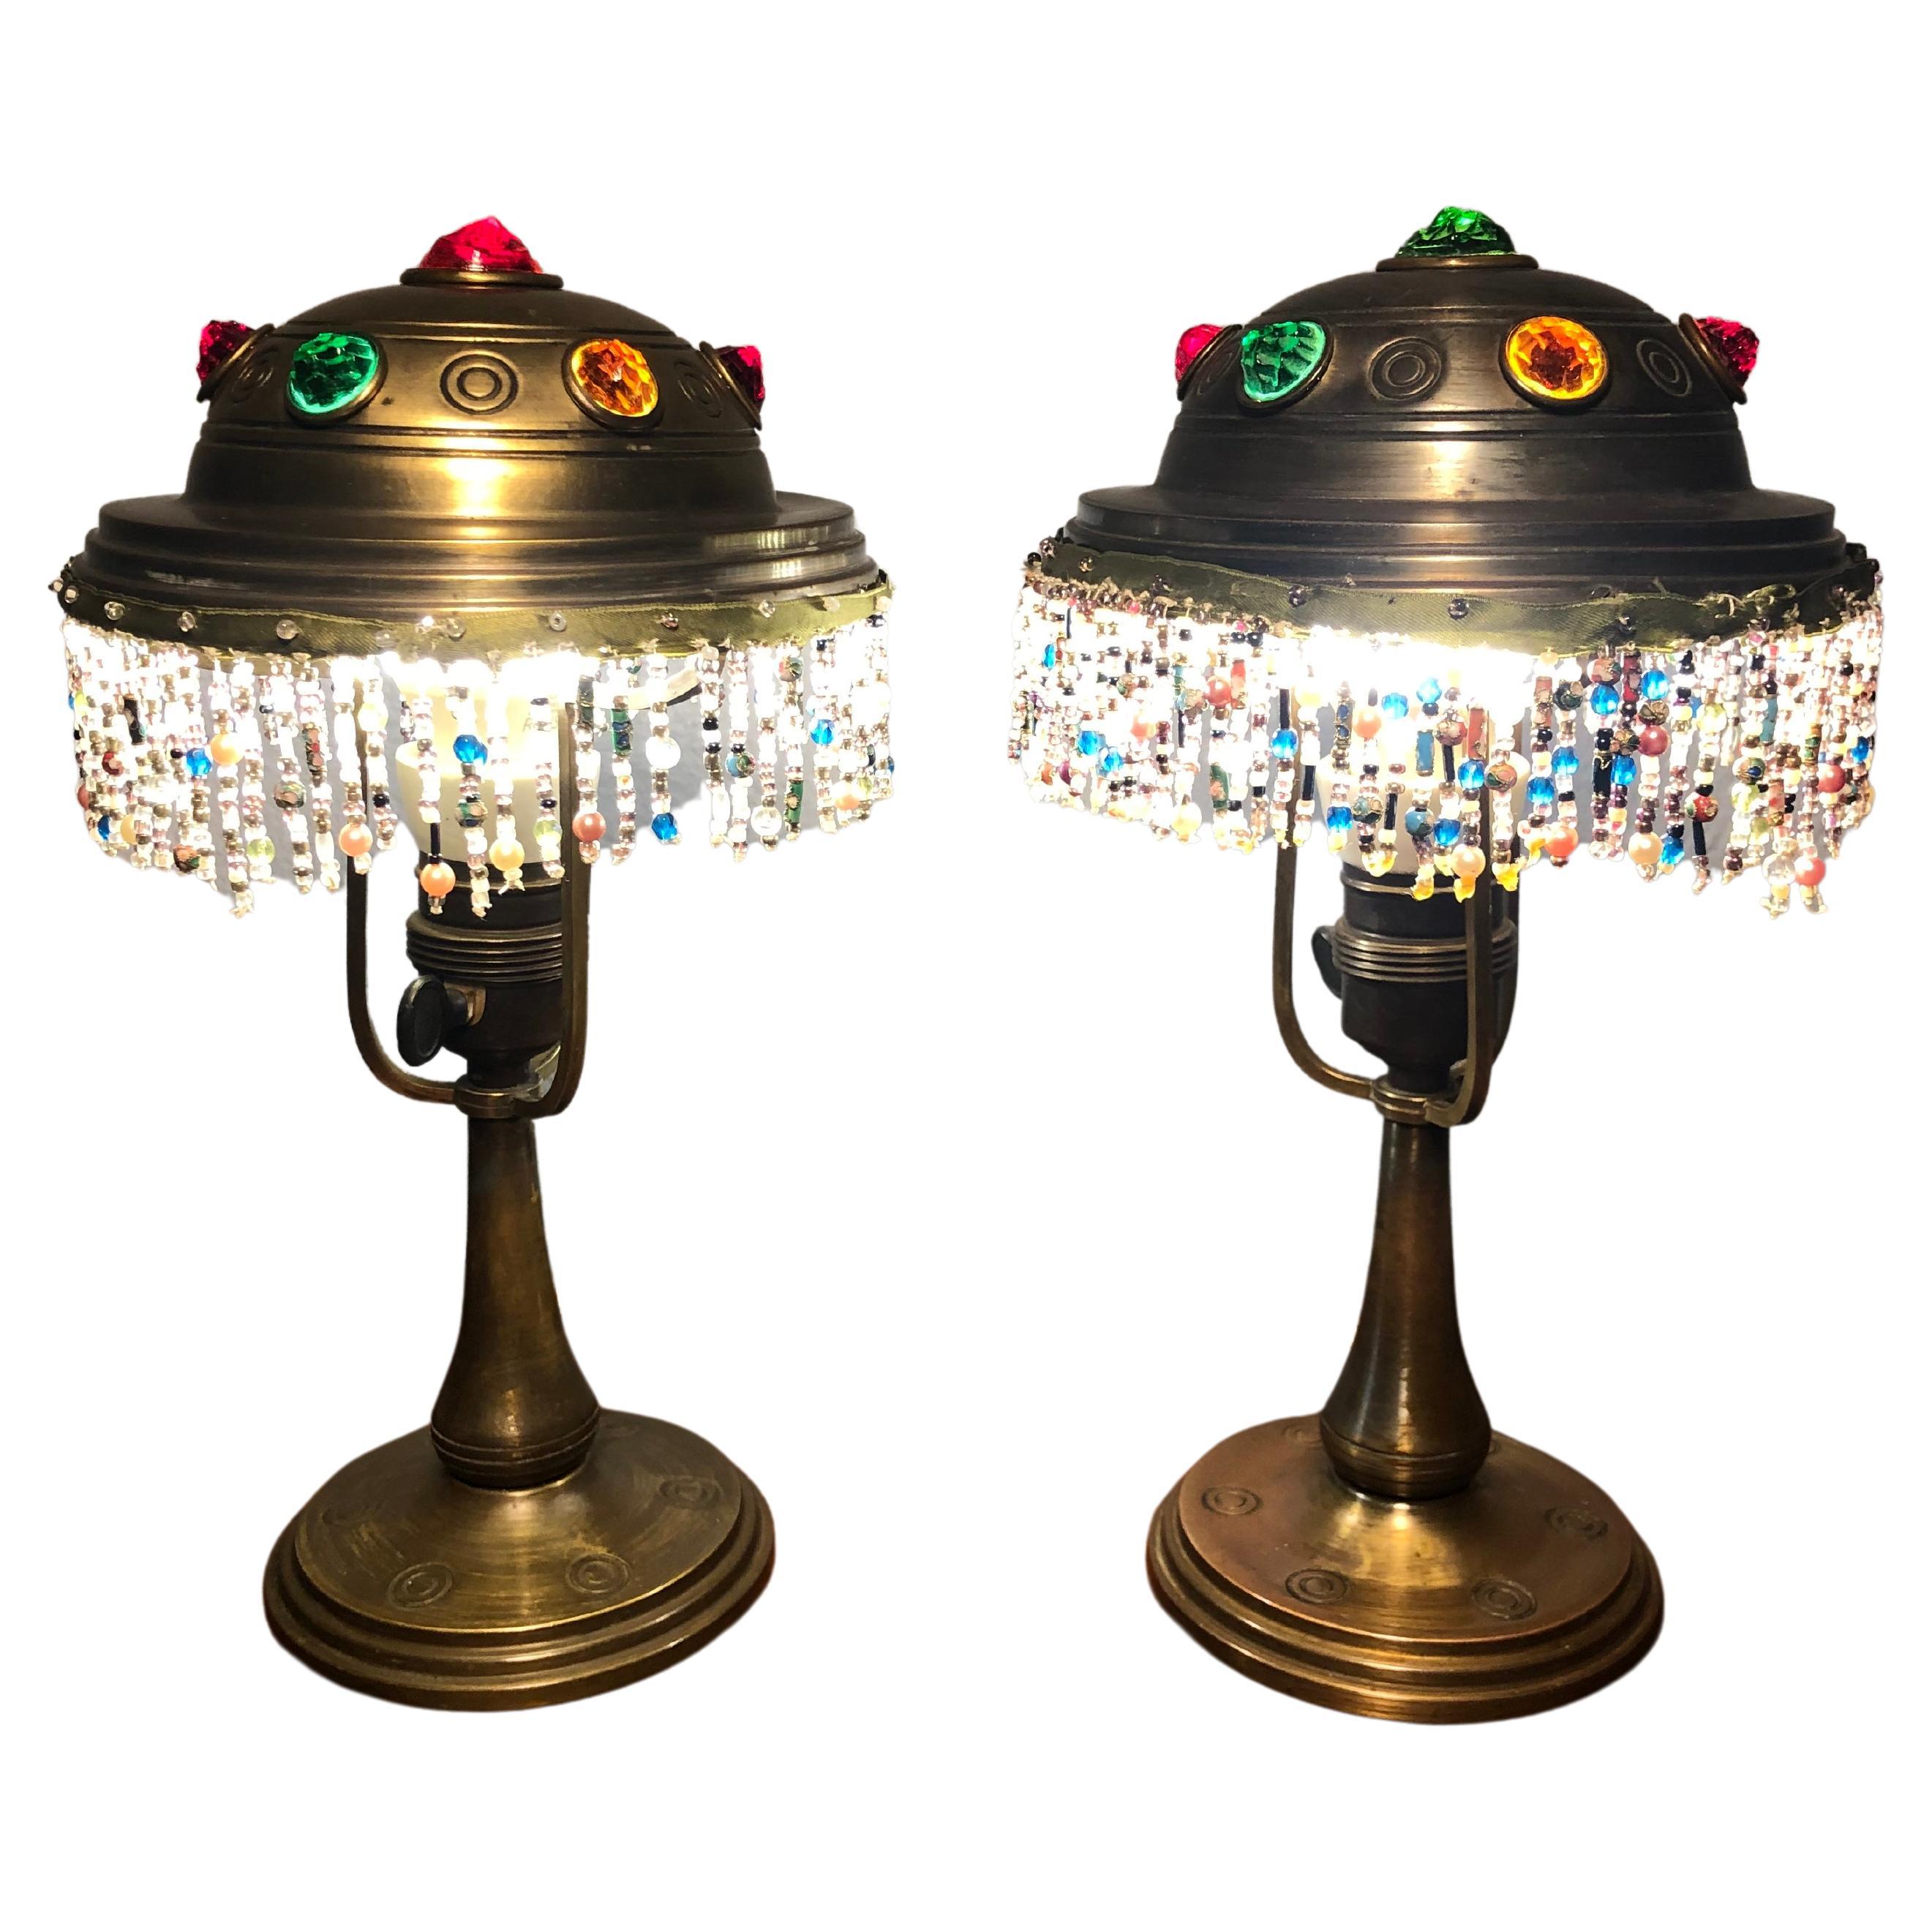 Pair of Antique Jugend Table Lamps For Sale